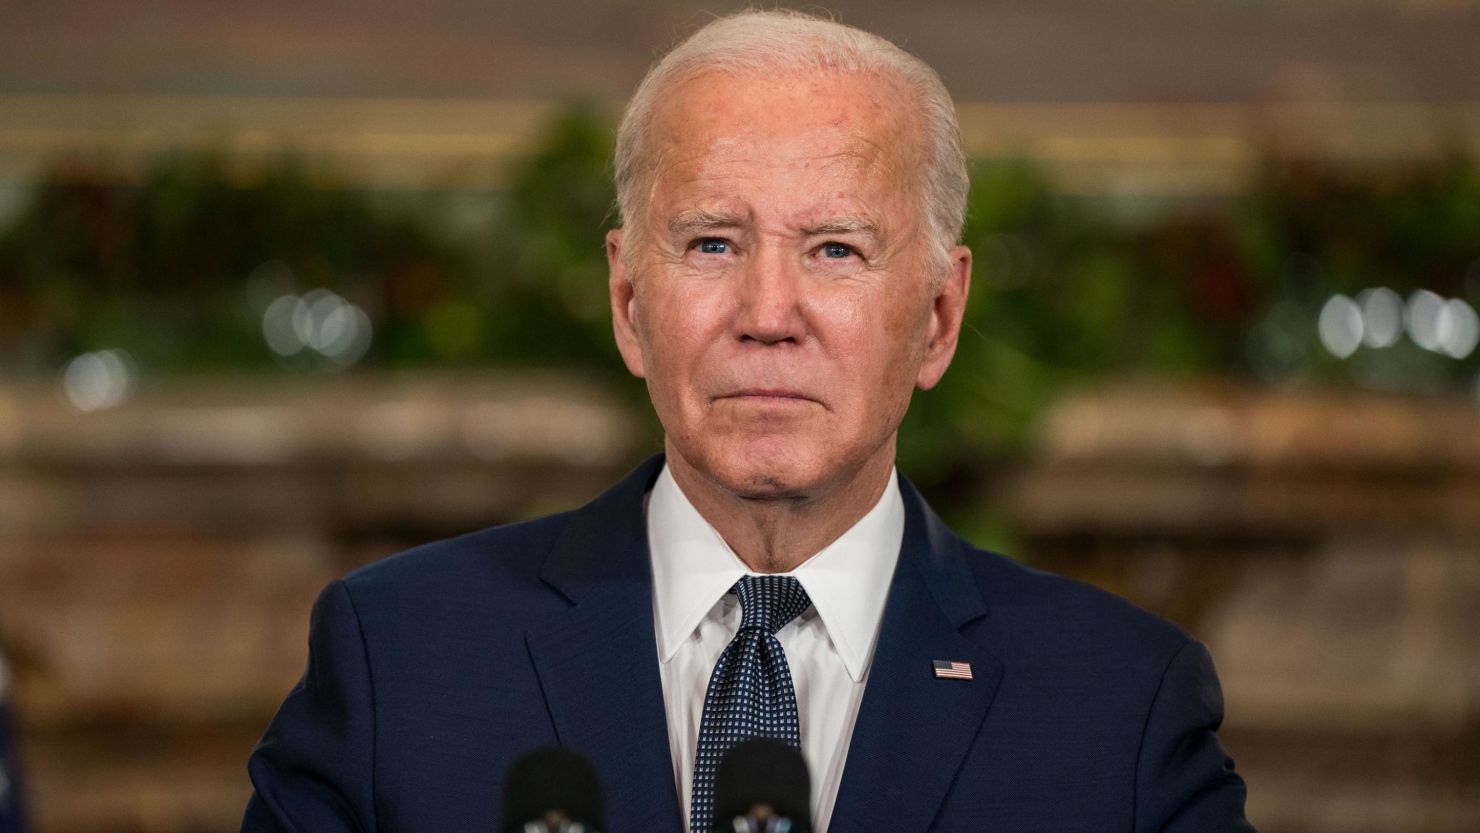 CNN Poll New Hampshire Democrats see Biden as party’s best shot to